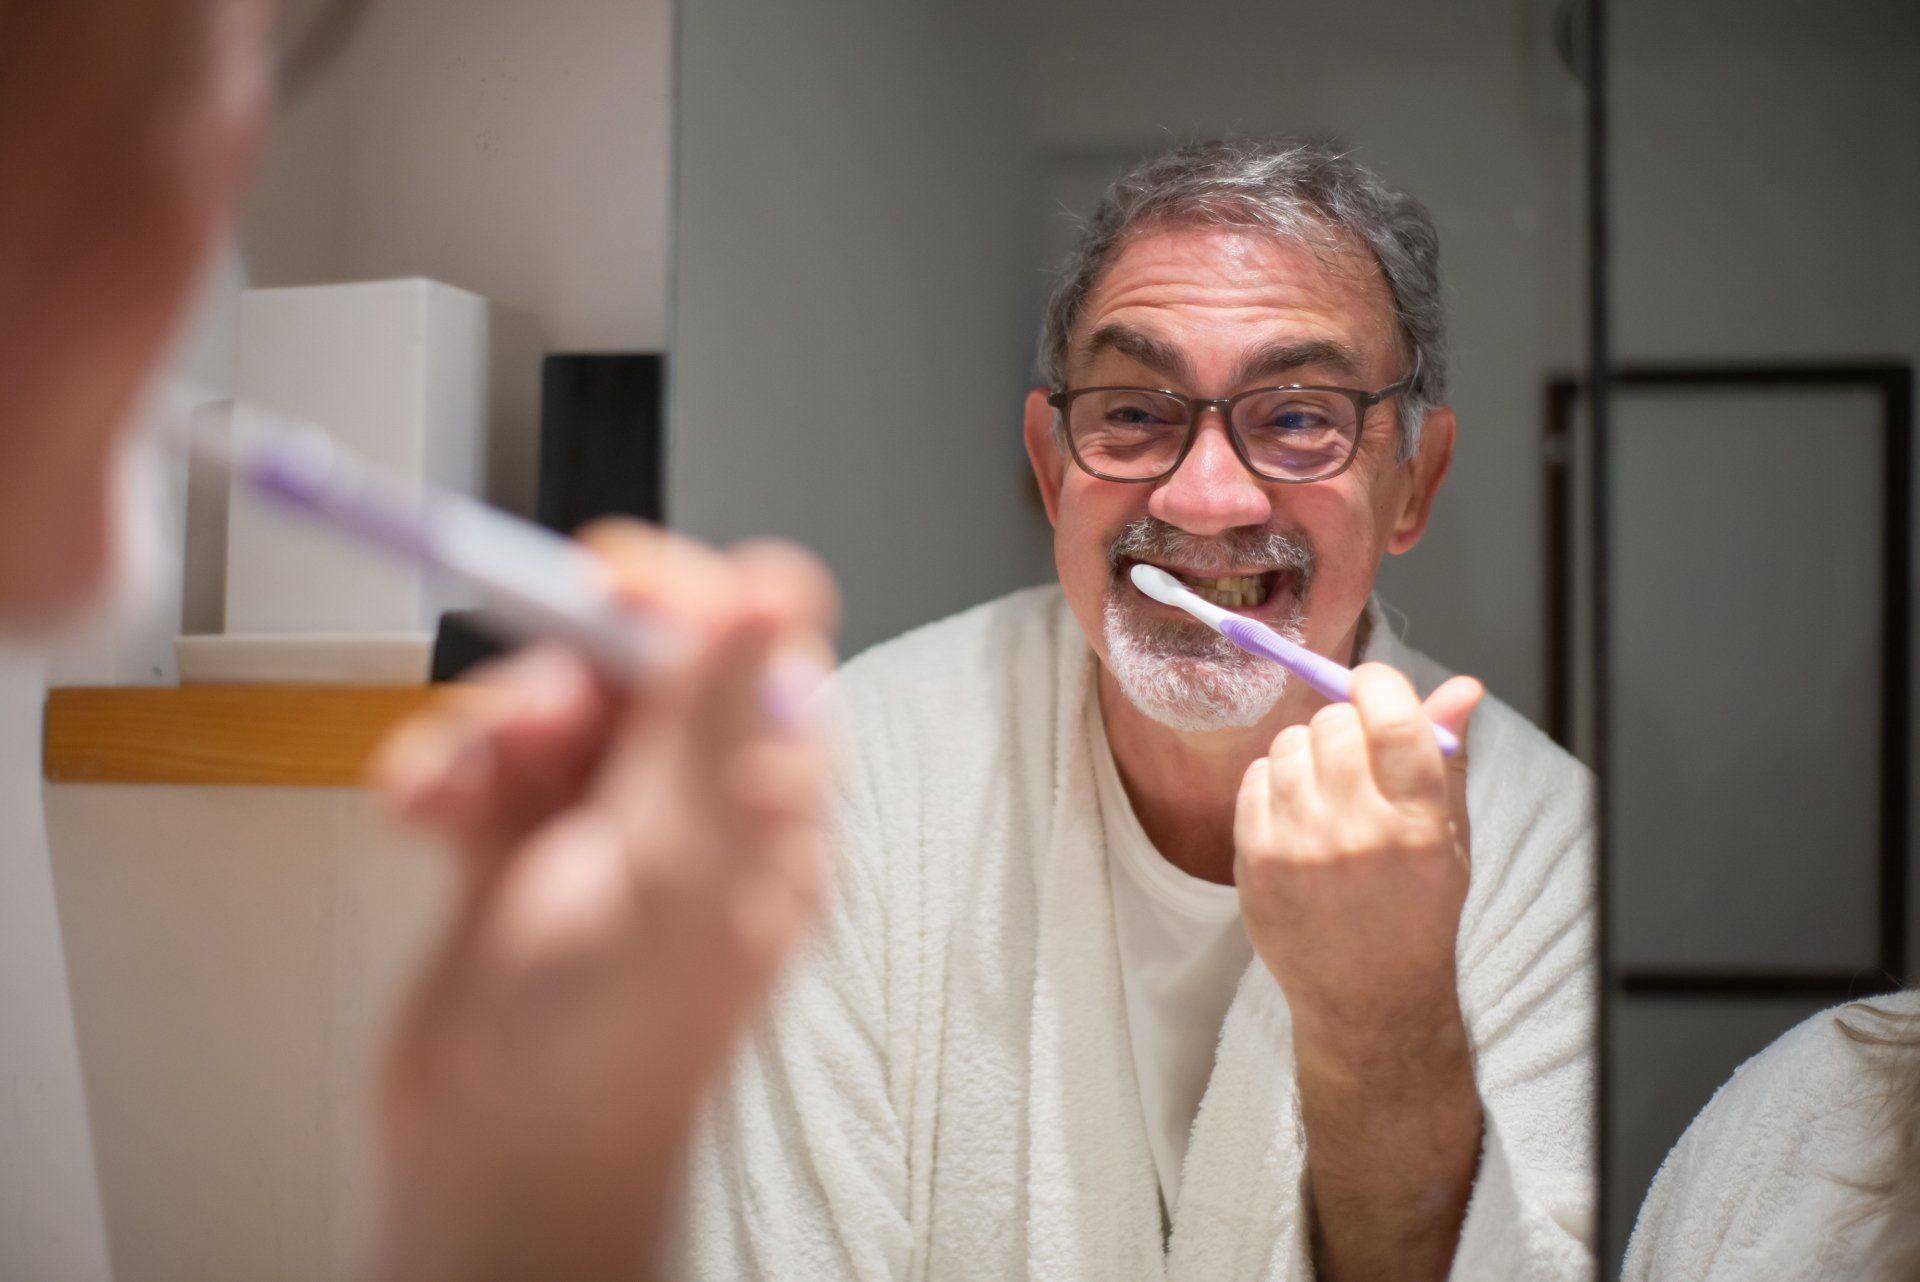 3 Common Dental Problems in the Elderly and How to Prevent Them